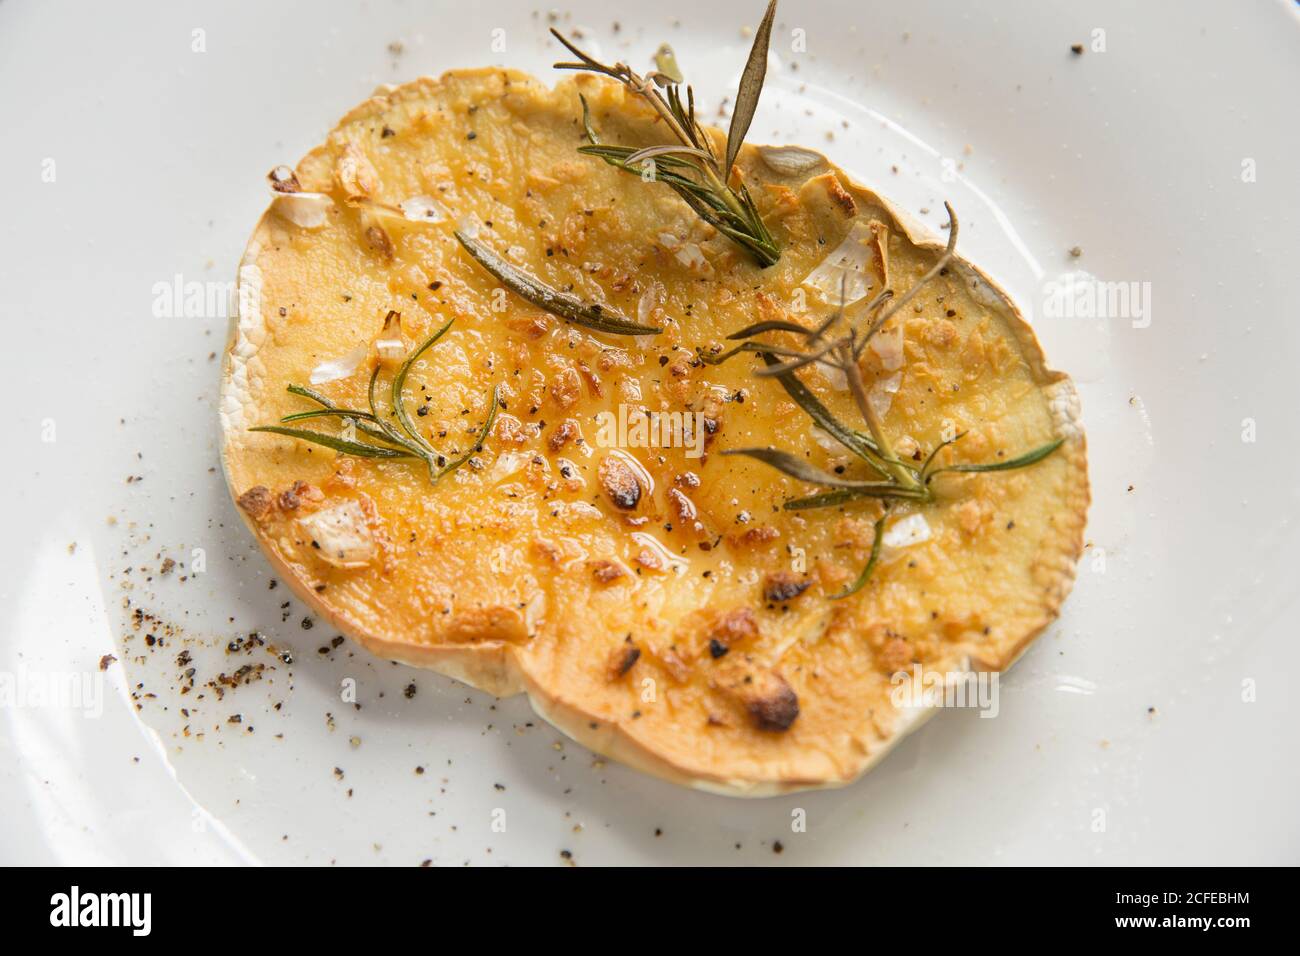 A slice of a giant puffball, Calvatia gigantea, that has been grilled with rosemary, minced garlic and olive oil and sprinkled with freshly ground bla Stock Photo